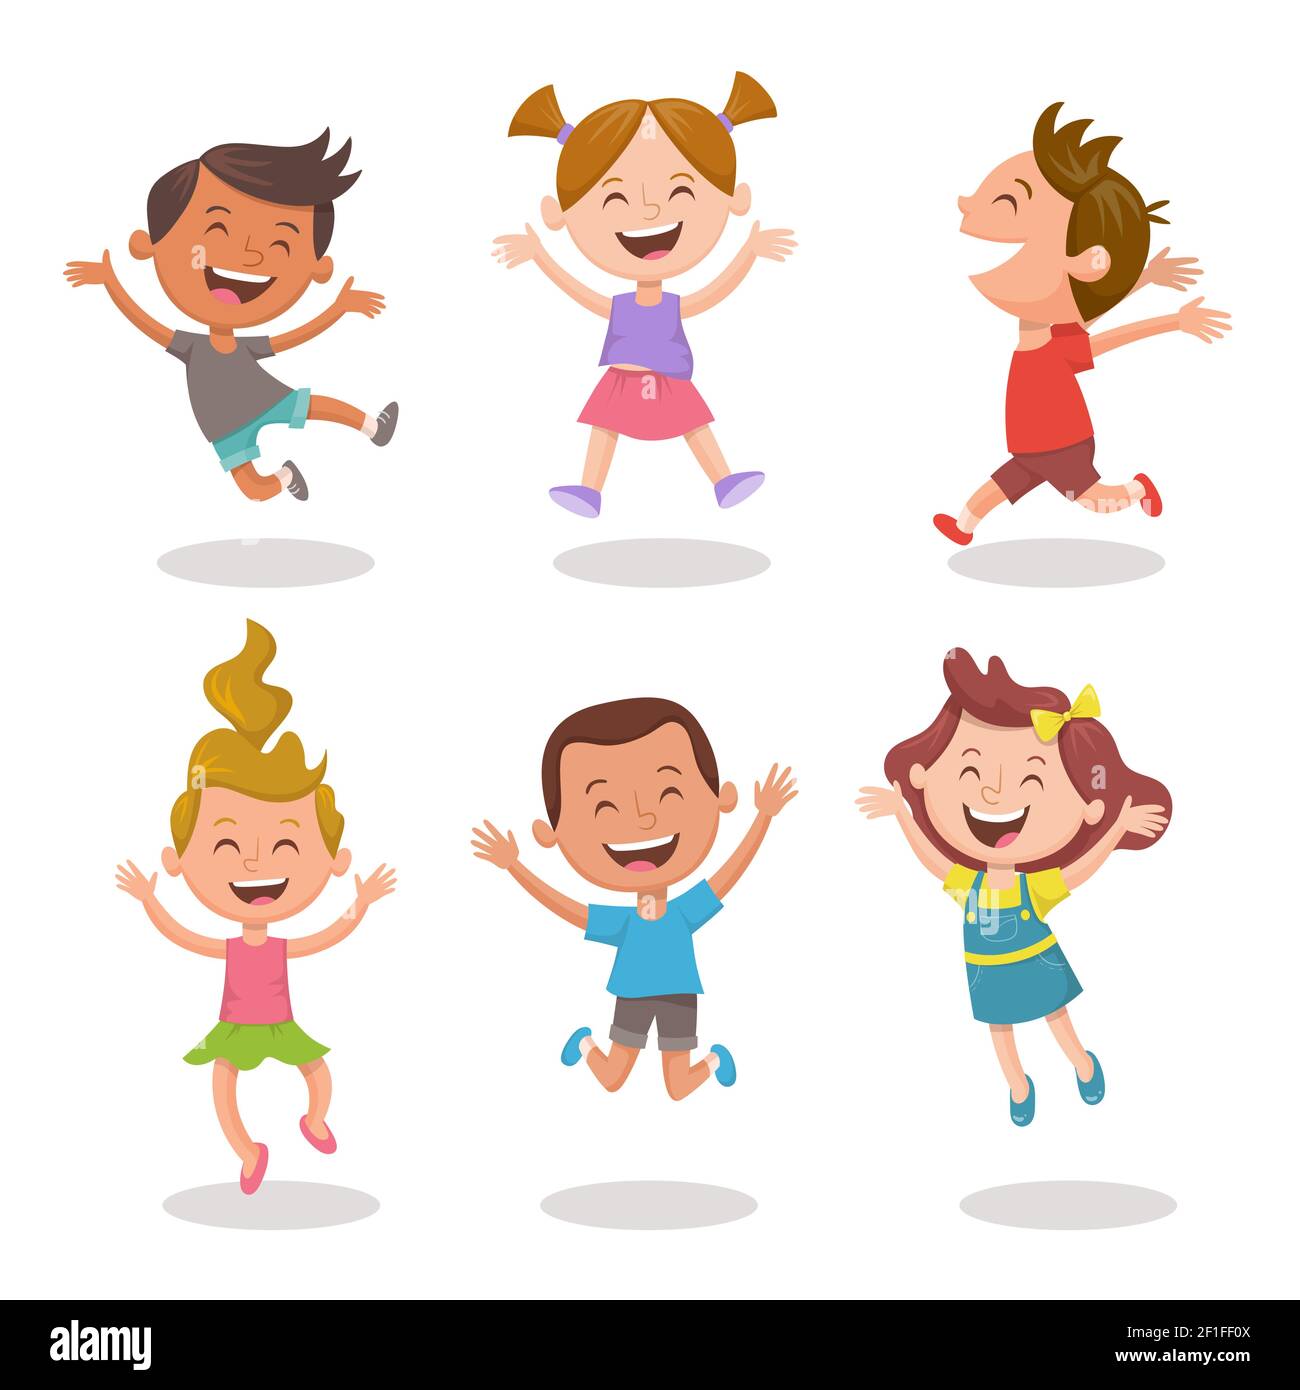 Happy multiracial kids joyfully jumping and laughing. Cartoon character design, isolated on white background. Set 2 of 3. Stock Vector